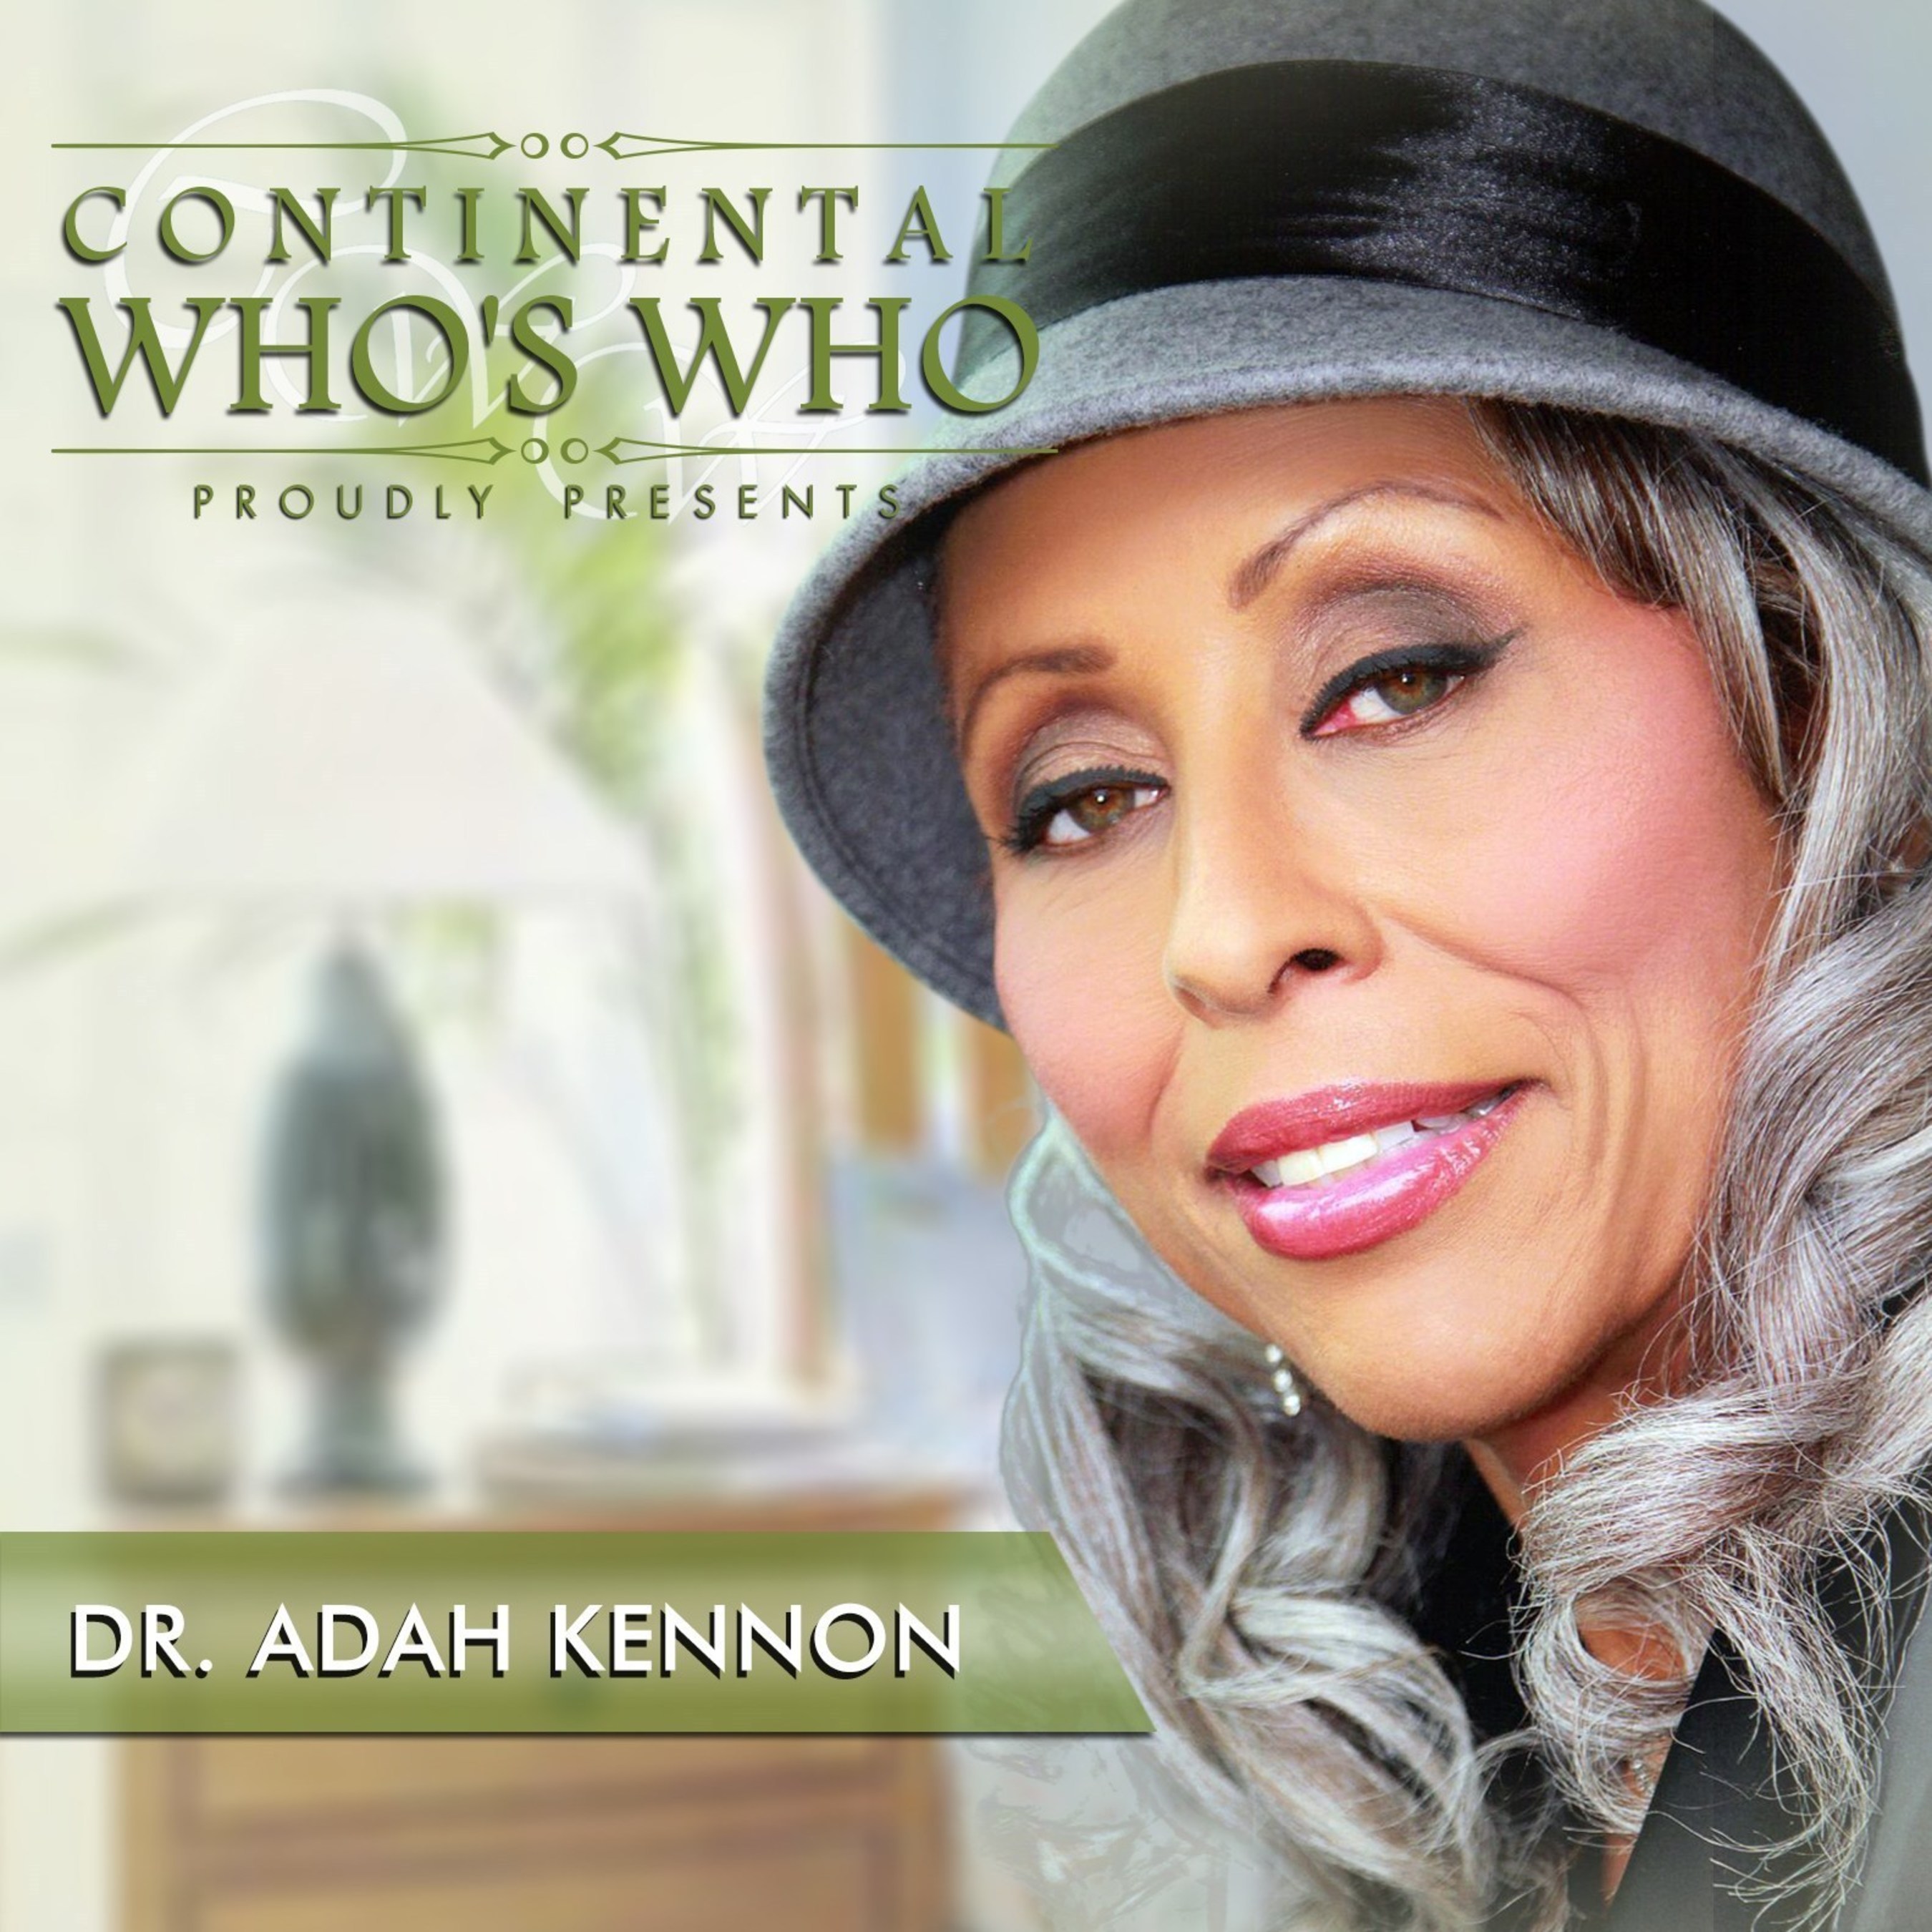 Adah F. Kennon, Ph.D, is recognized by Continental Who's Who among Pinnacle Professionals in the field of Entertainment. Adah is the Owner of Sheba Enterprises. (PRNewsFoto/Continental Who's Who)